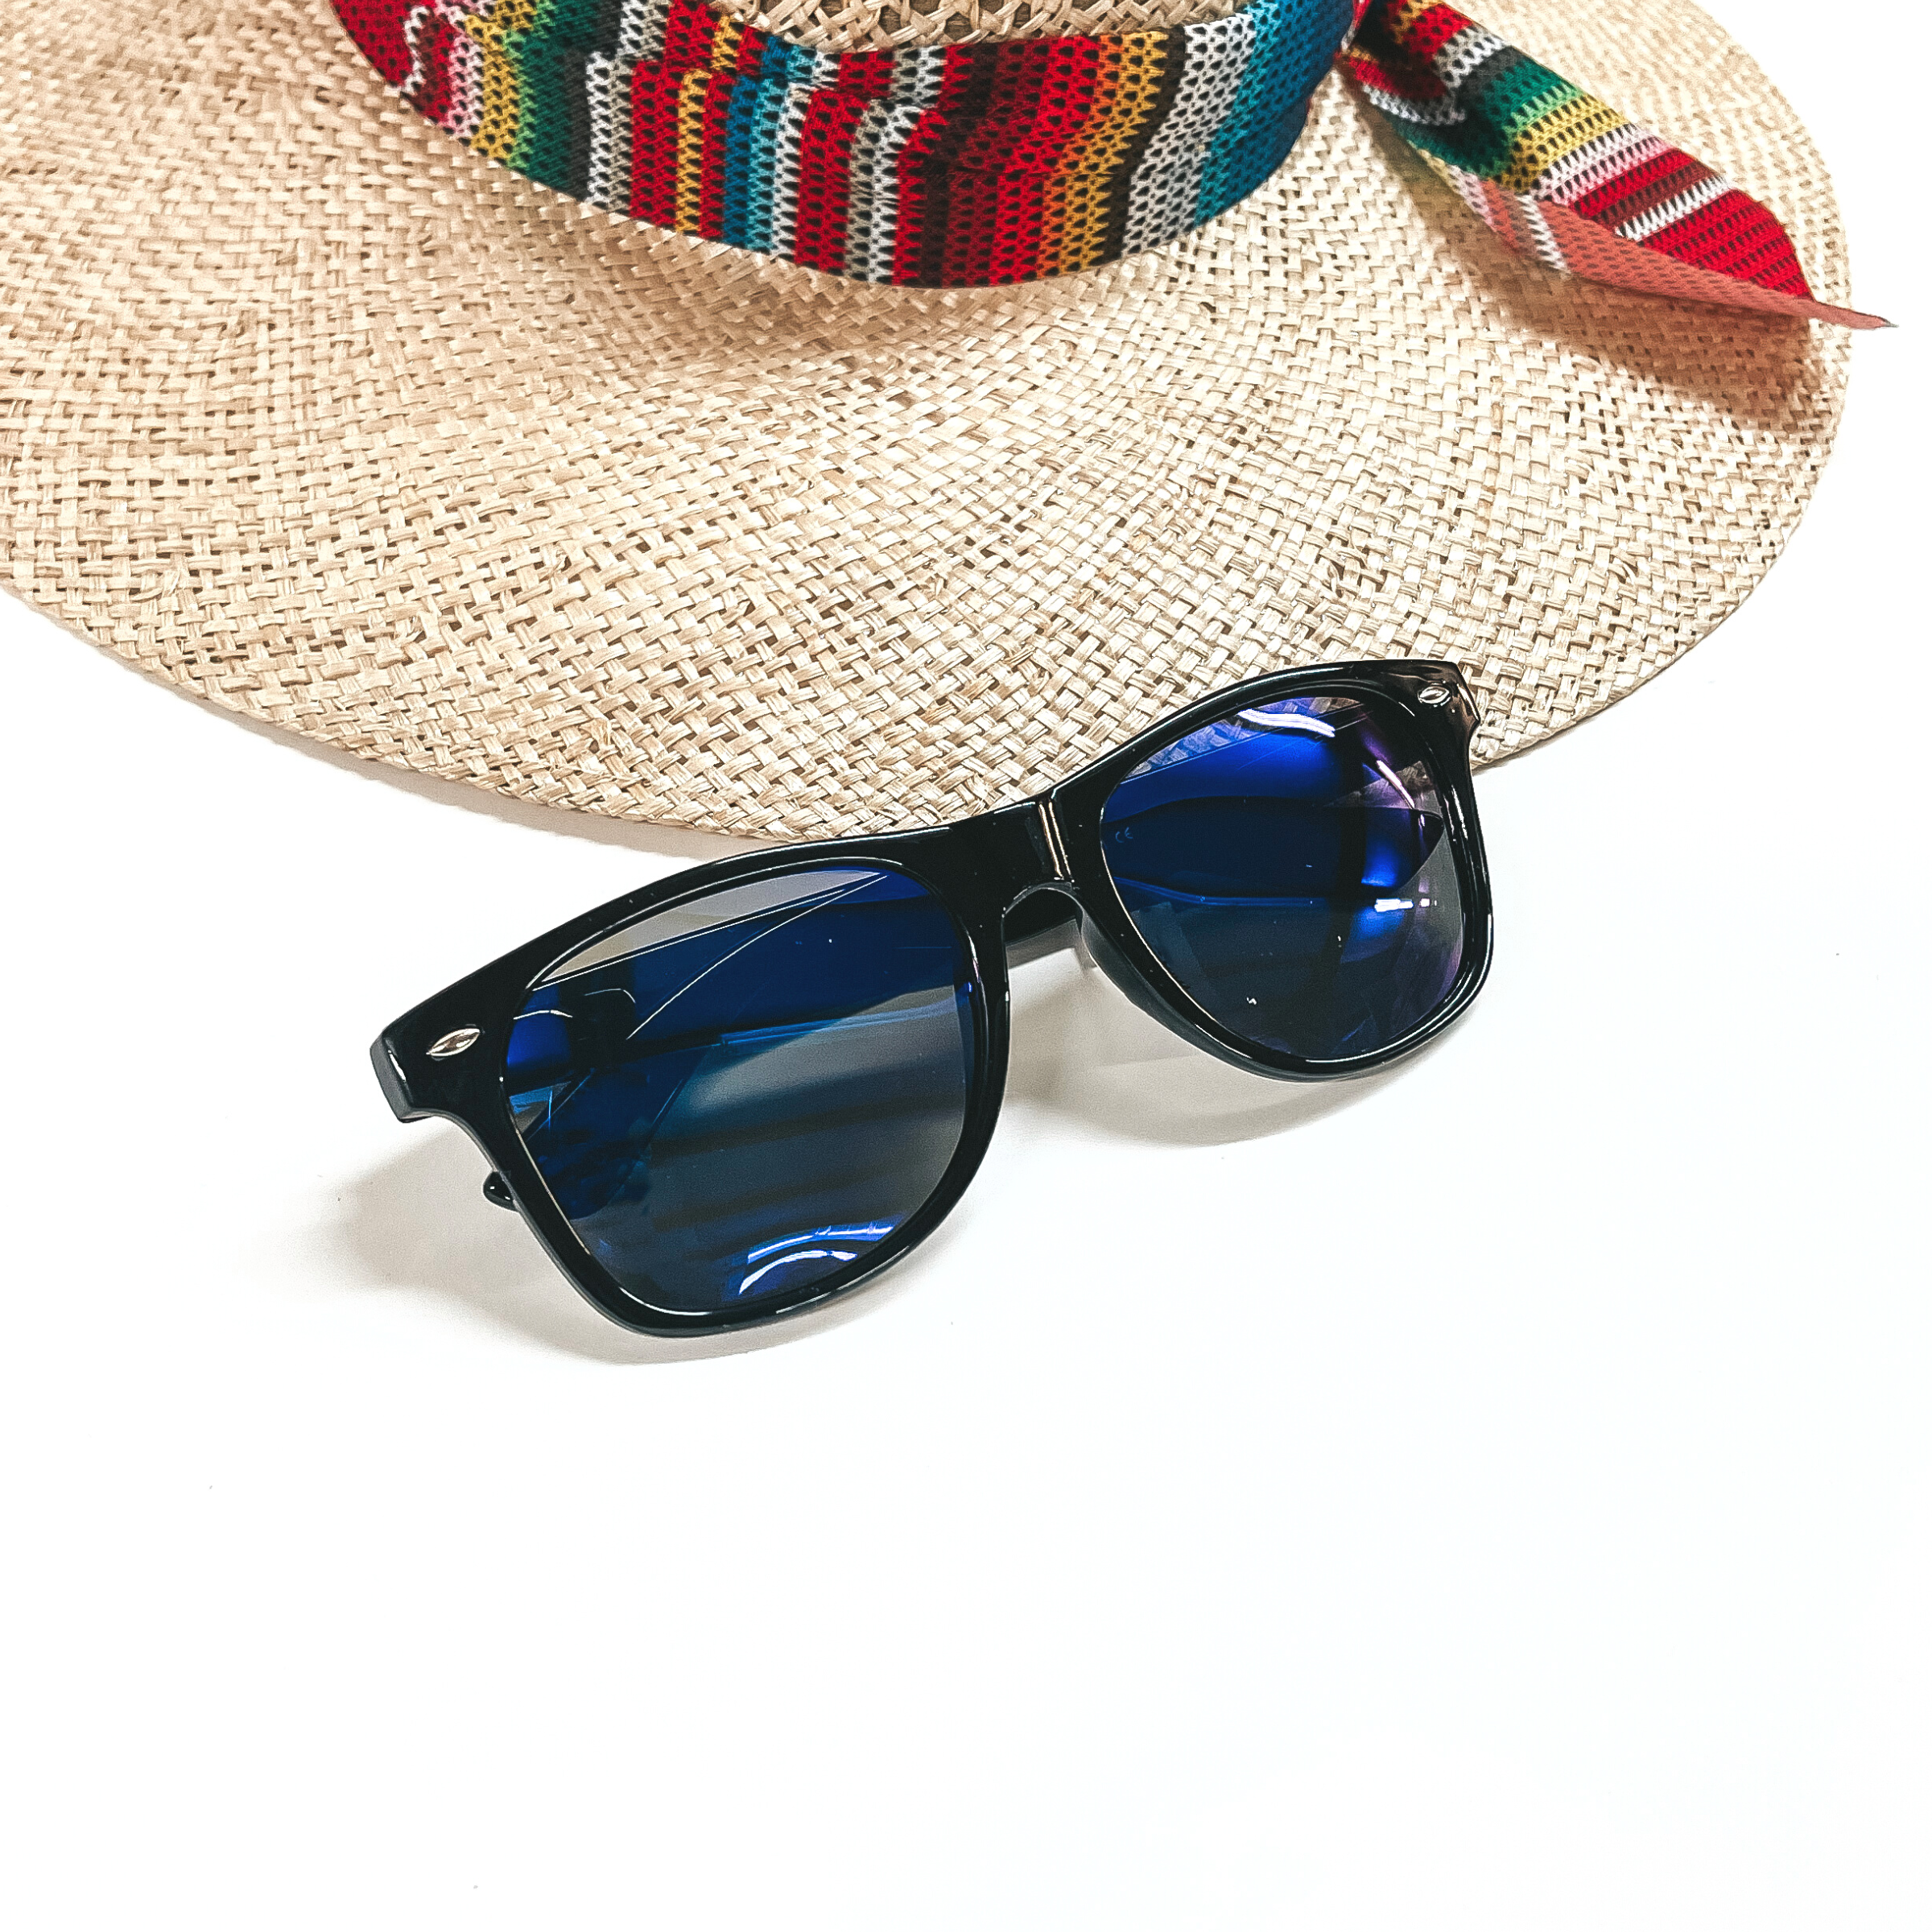 These are black framed sunglasses with blue/dark purple lenses and silver detailing. These sunglasses are placed on a white background and a straw hat with a colorful hat band in the back as decor.